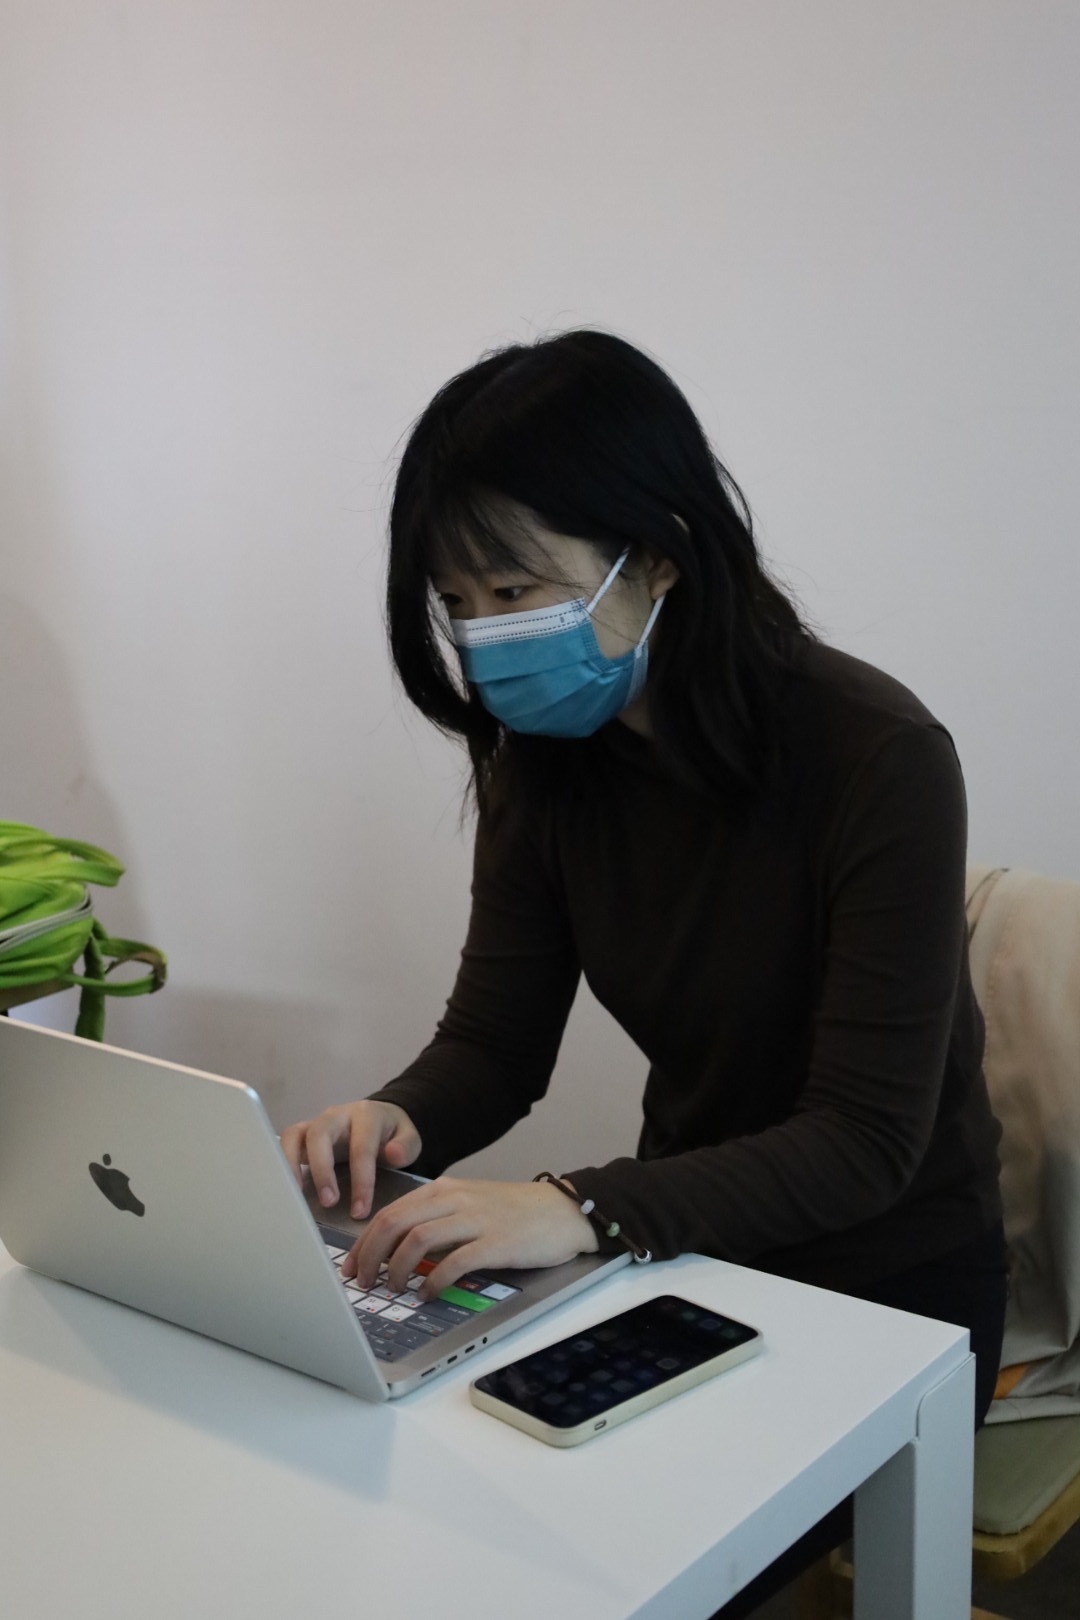 Yiwen Xu, who has shoulder-length straight hair with bangs, is wearing a surgical mask and all black outfit. She is working on her laptop on a white desk.